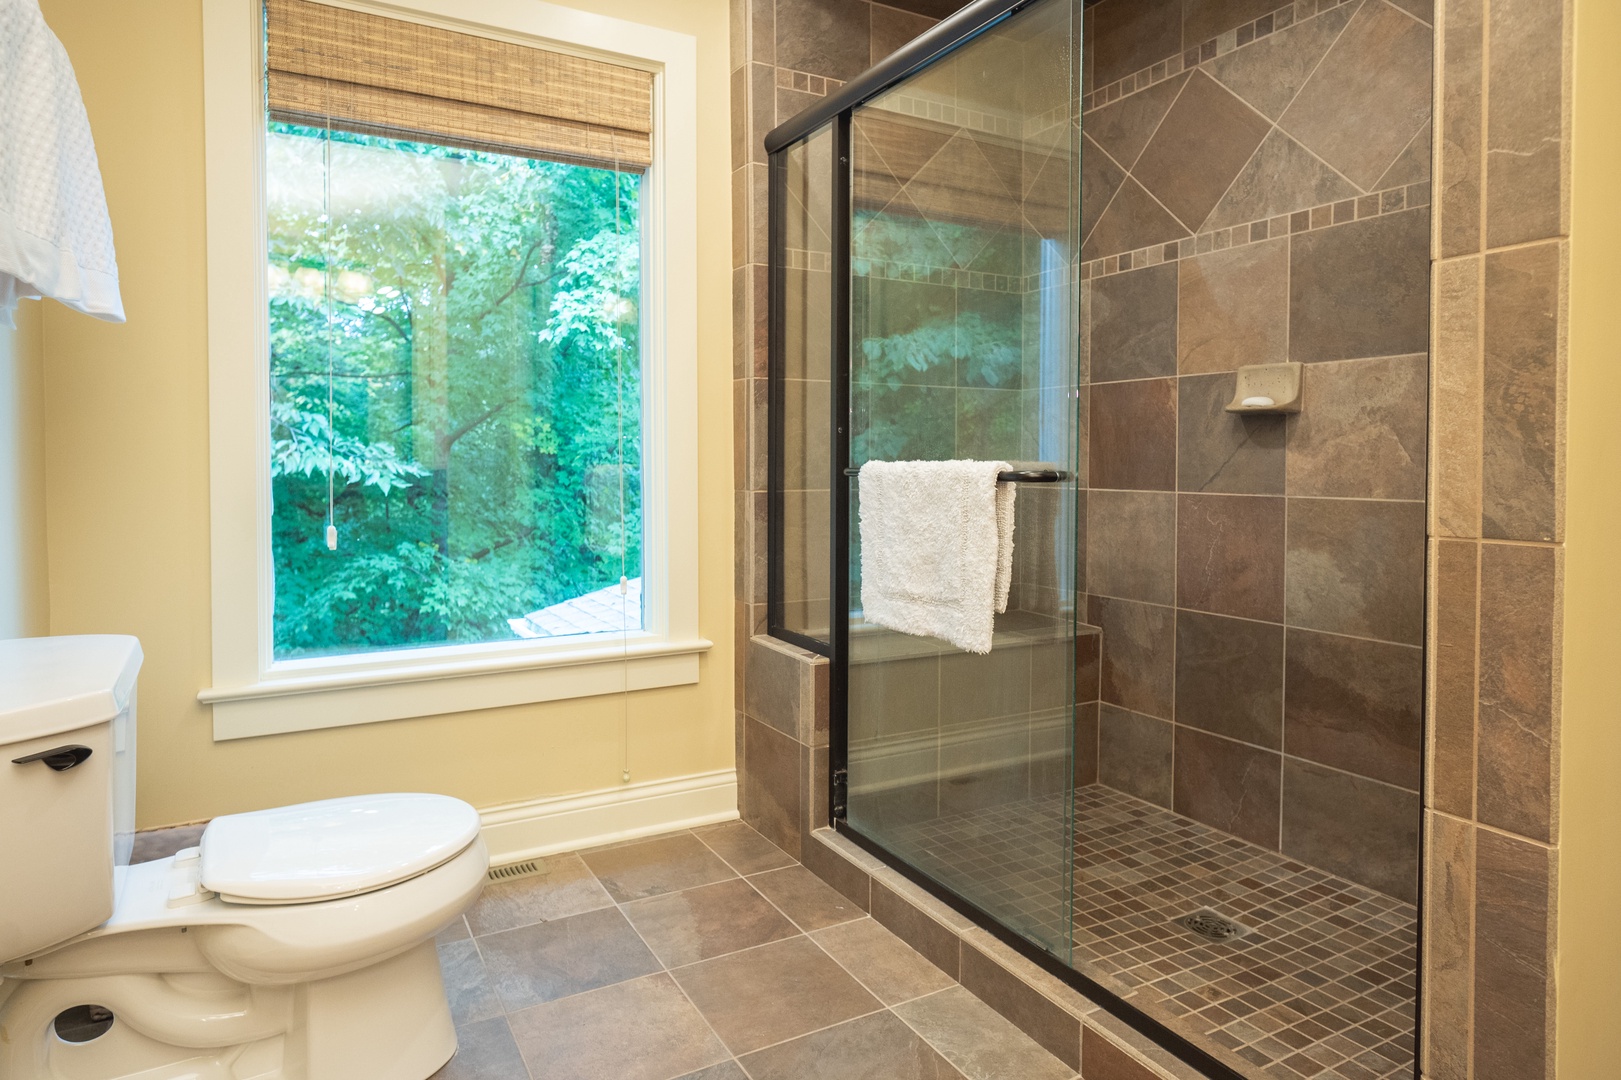 The 2nd floor king en suite offers a single vanity & luxurious glass shower